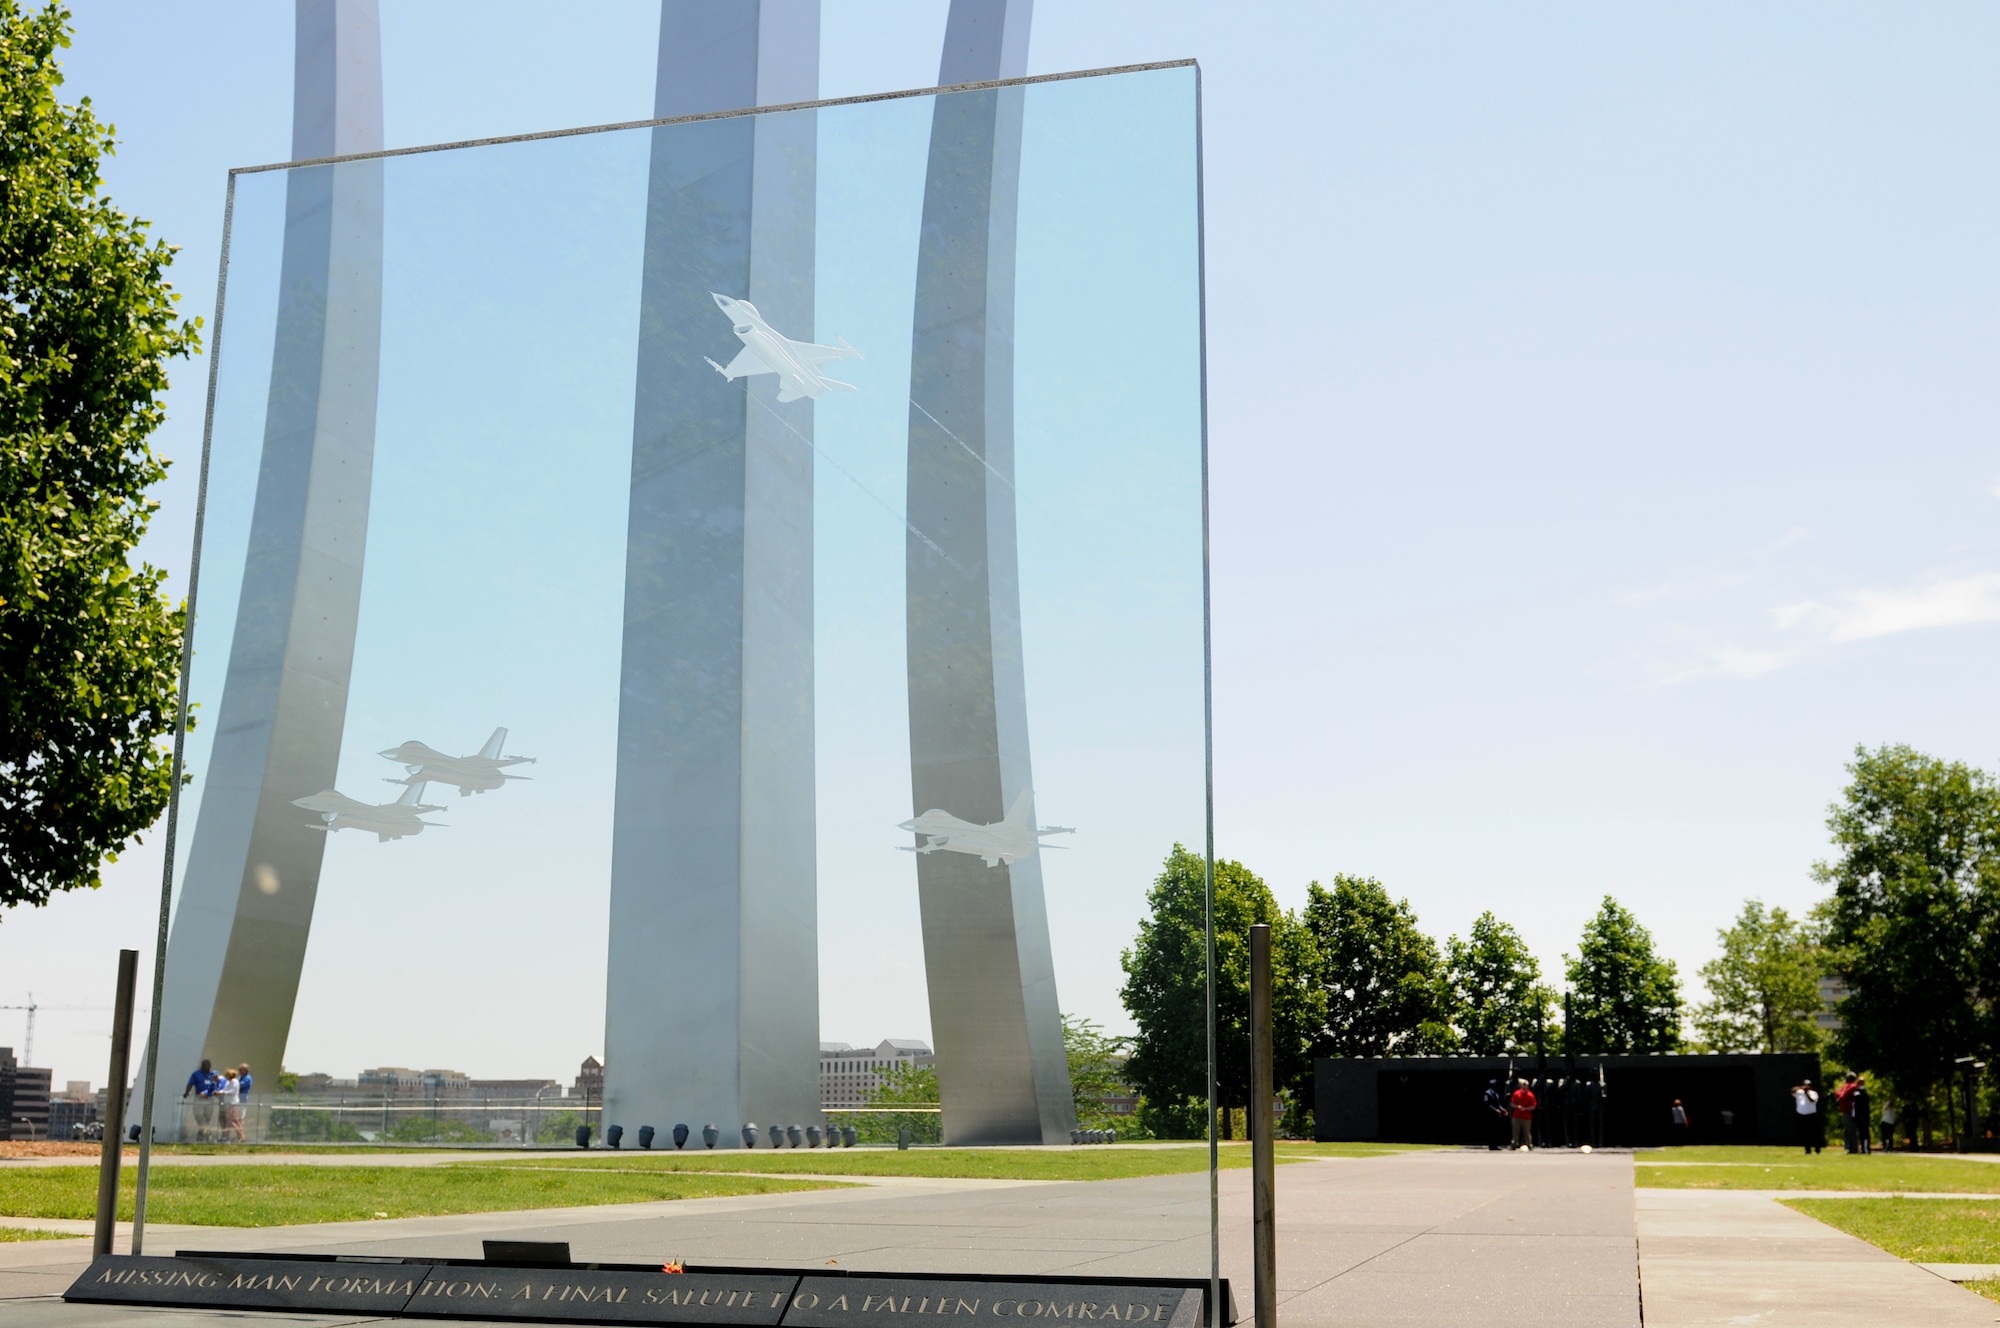 A glass contemplation wall honoring the “missing man formation” sits on display, May 14, 2015, at the Air force Memorial, Arlington, Va. Keesler leadership visited the Air Force Memorial during their annual Capitol Hill visit, where they met with Mississippi congressional representatives to discuss Keesler’s growth and development, and its economic impact on the state. (U.S. Air Force photo by Airman 1st Class Duncan McElroy)